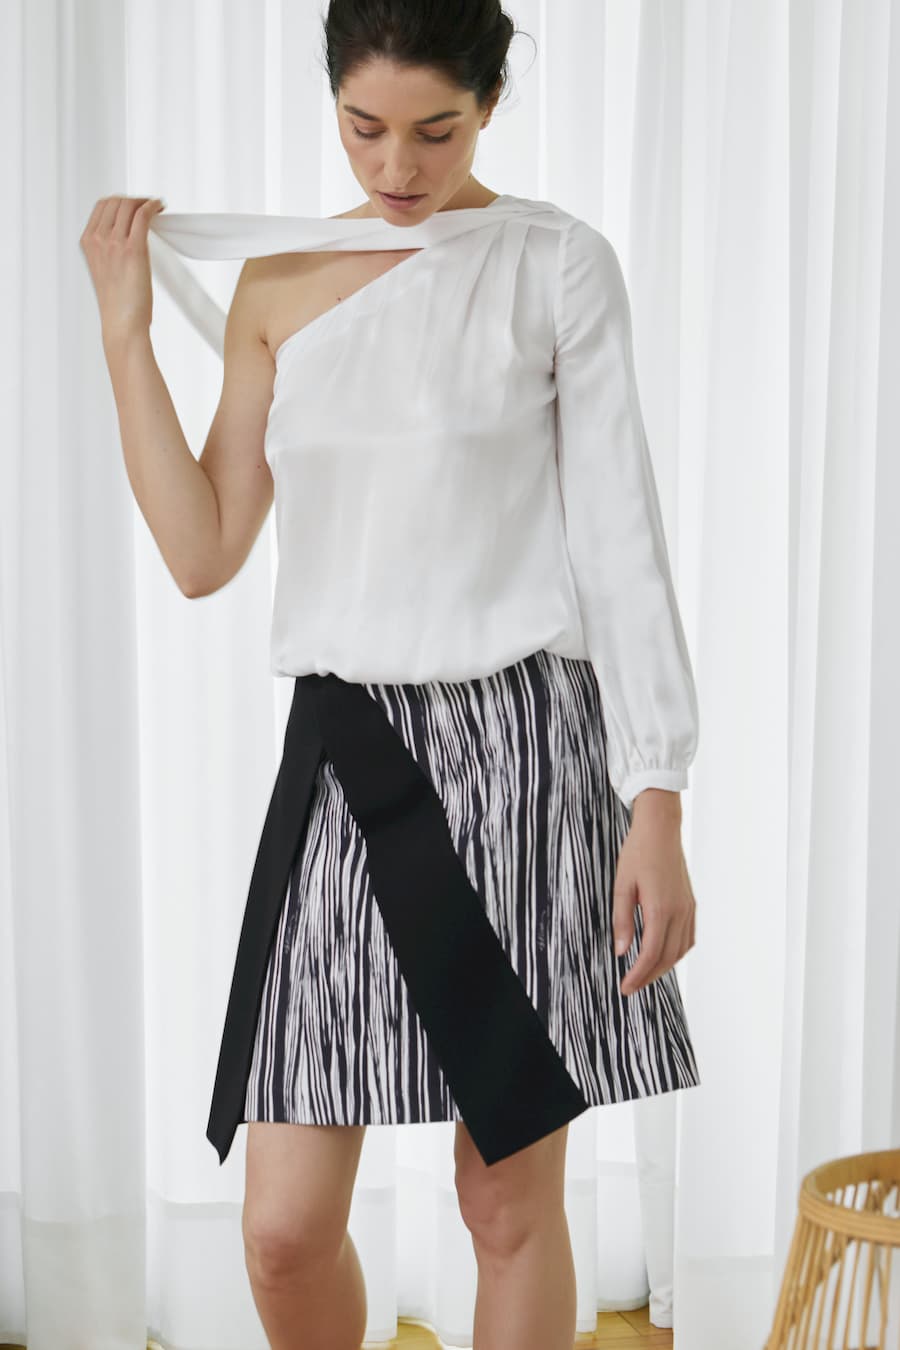 Black and white a-line skirt | D2line